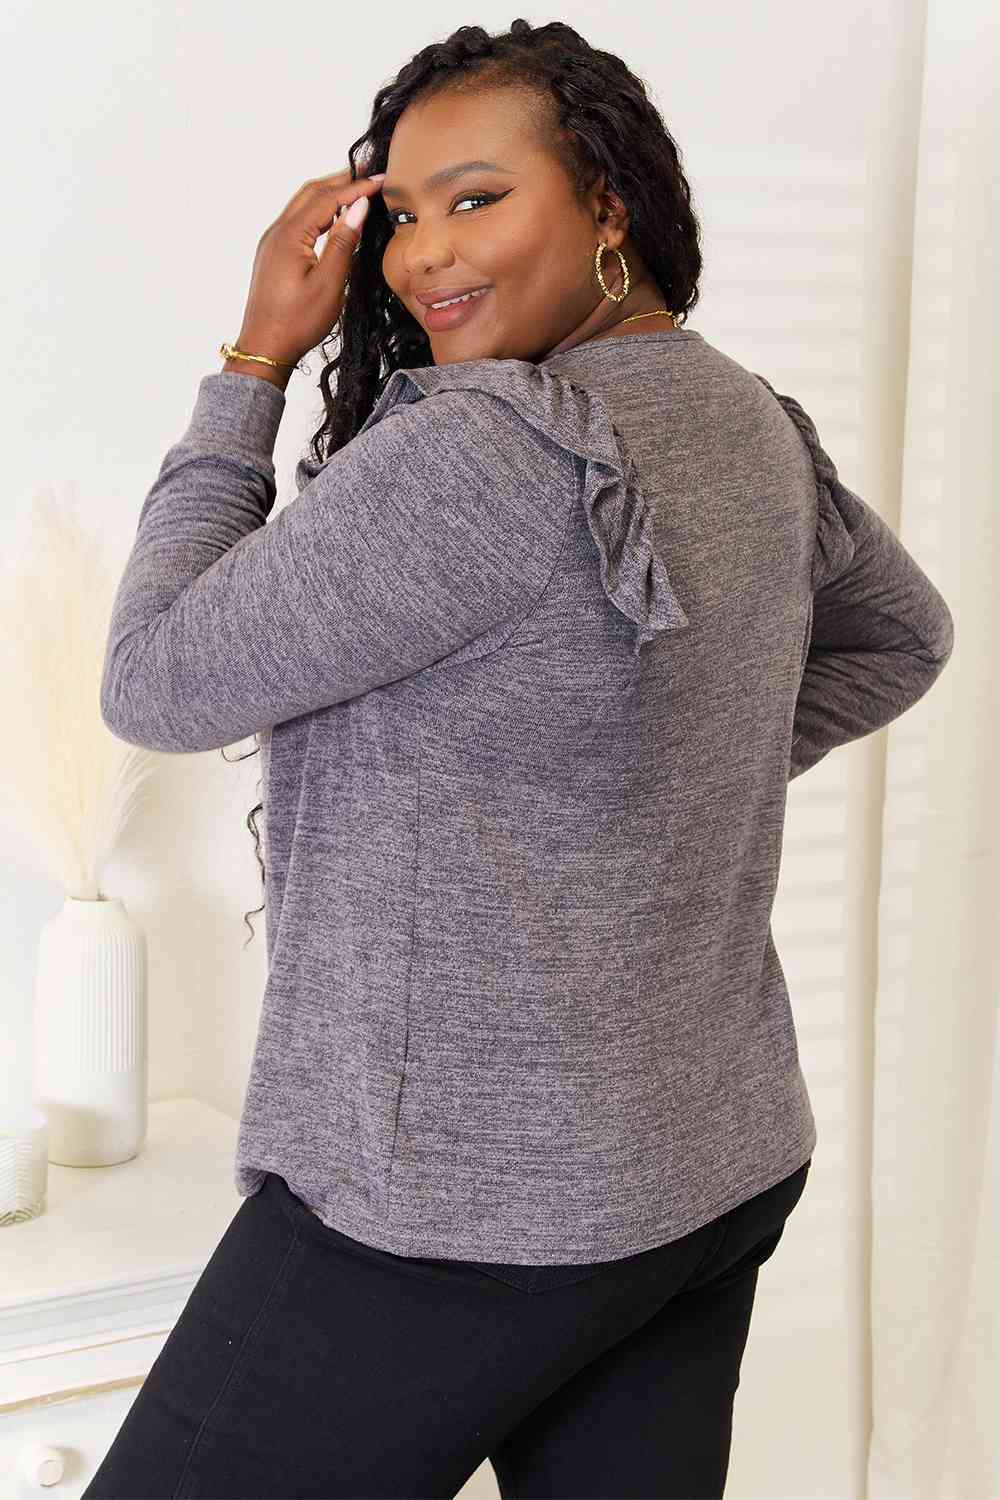 Square Neck Ruffle Shoulder Long Sleeve T-ShirtTeeDouble Take